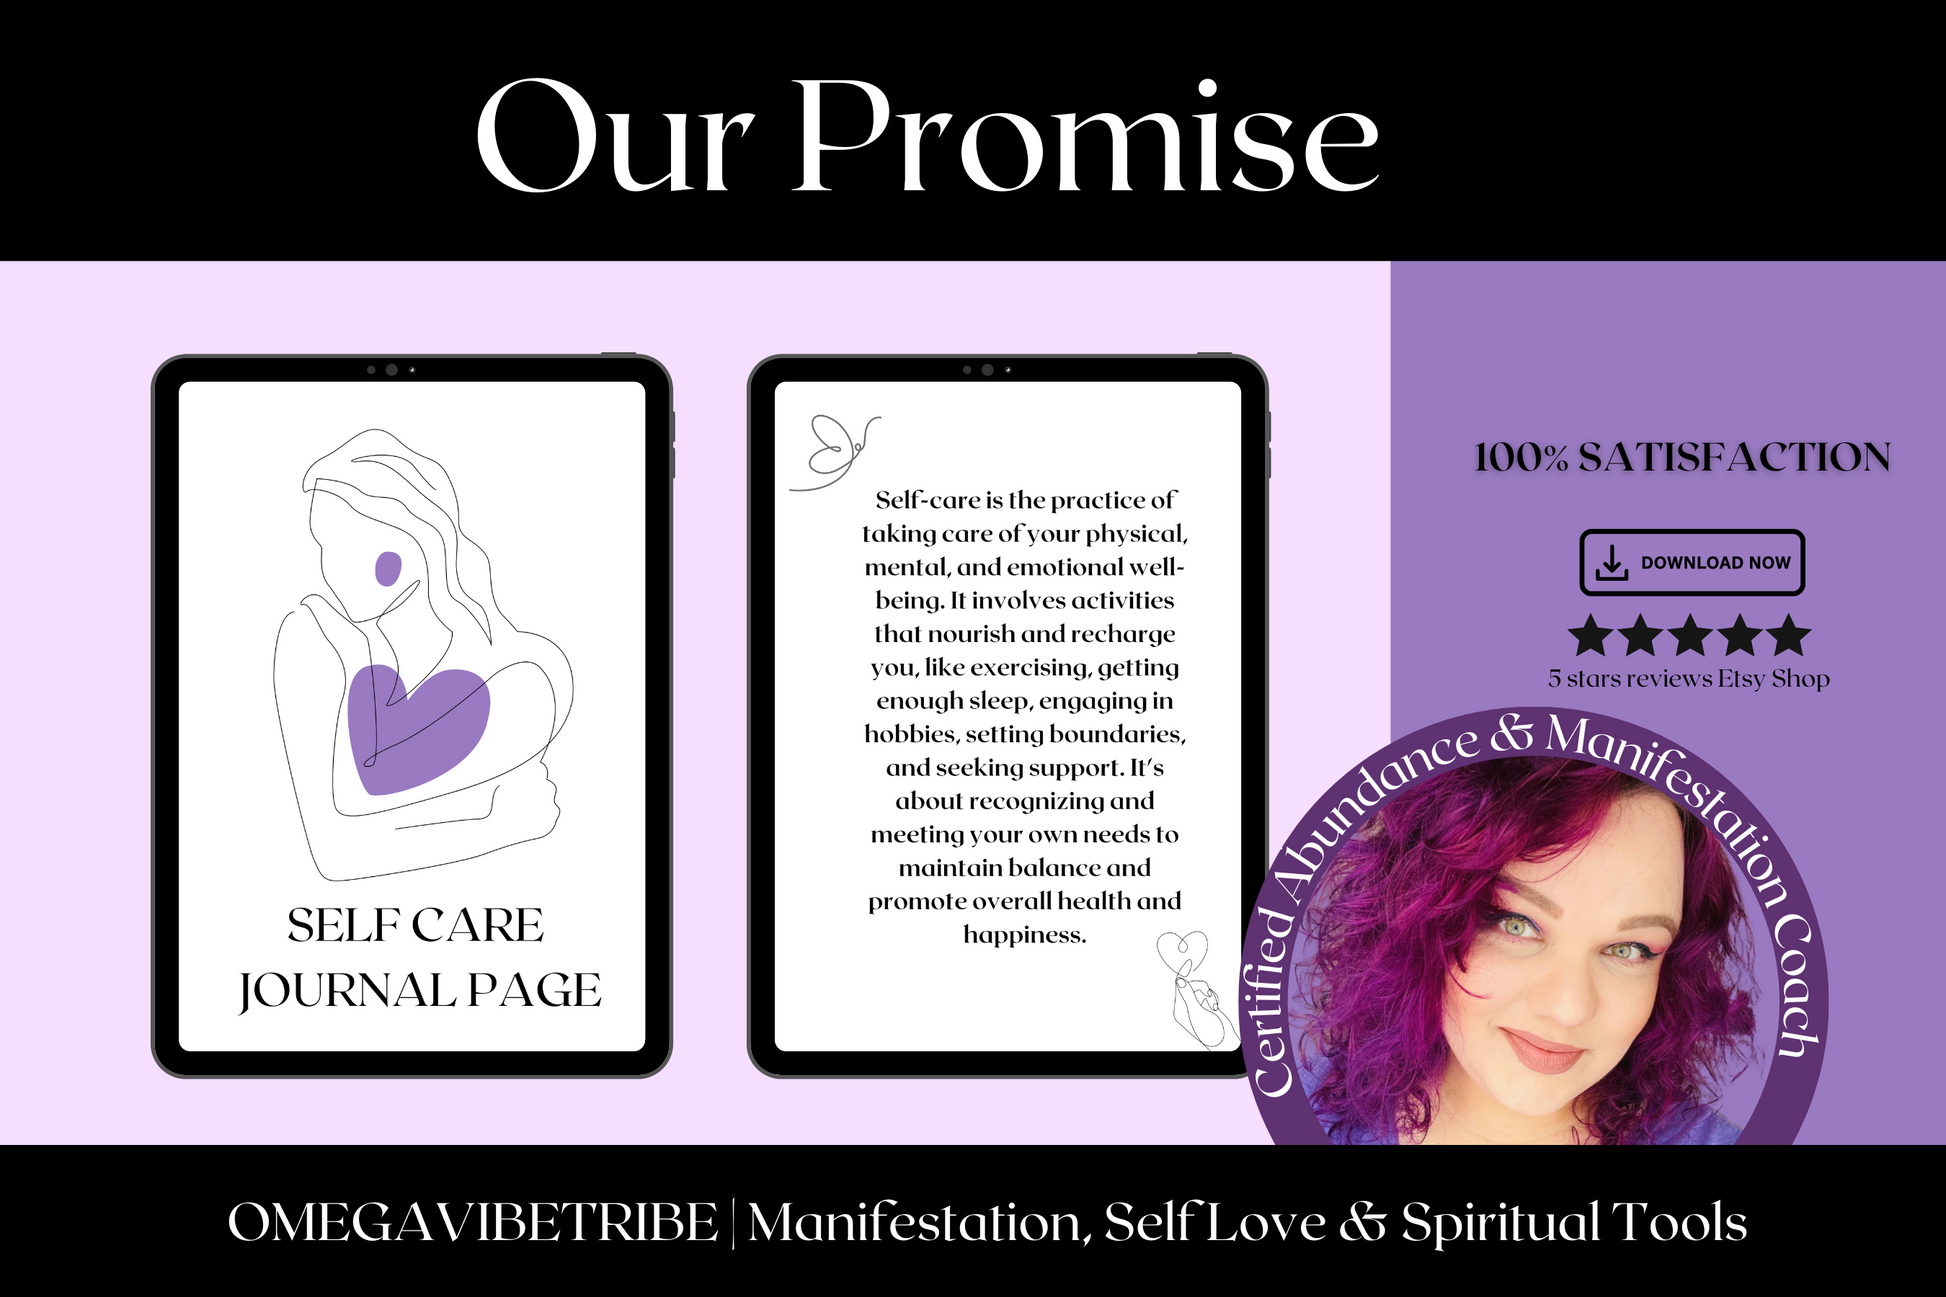 this page shows the promise of the satisfaction of the self care printable journal page